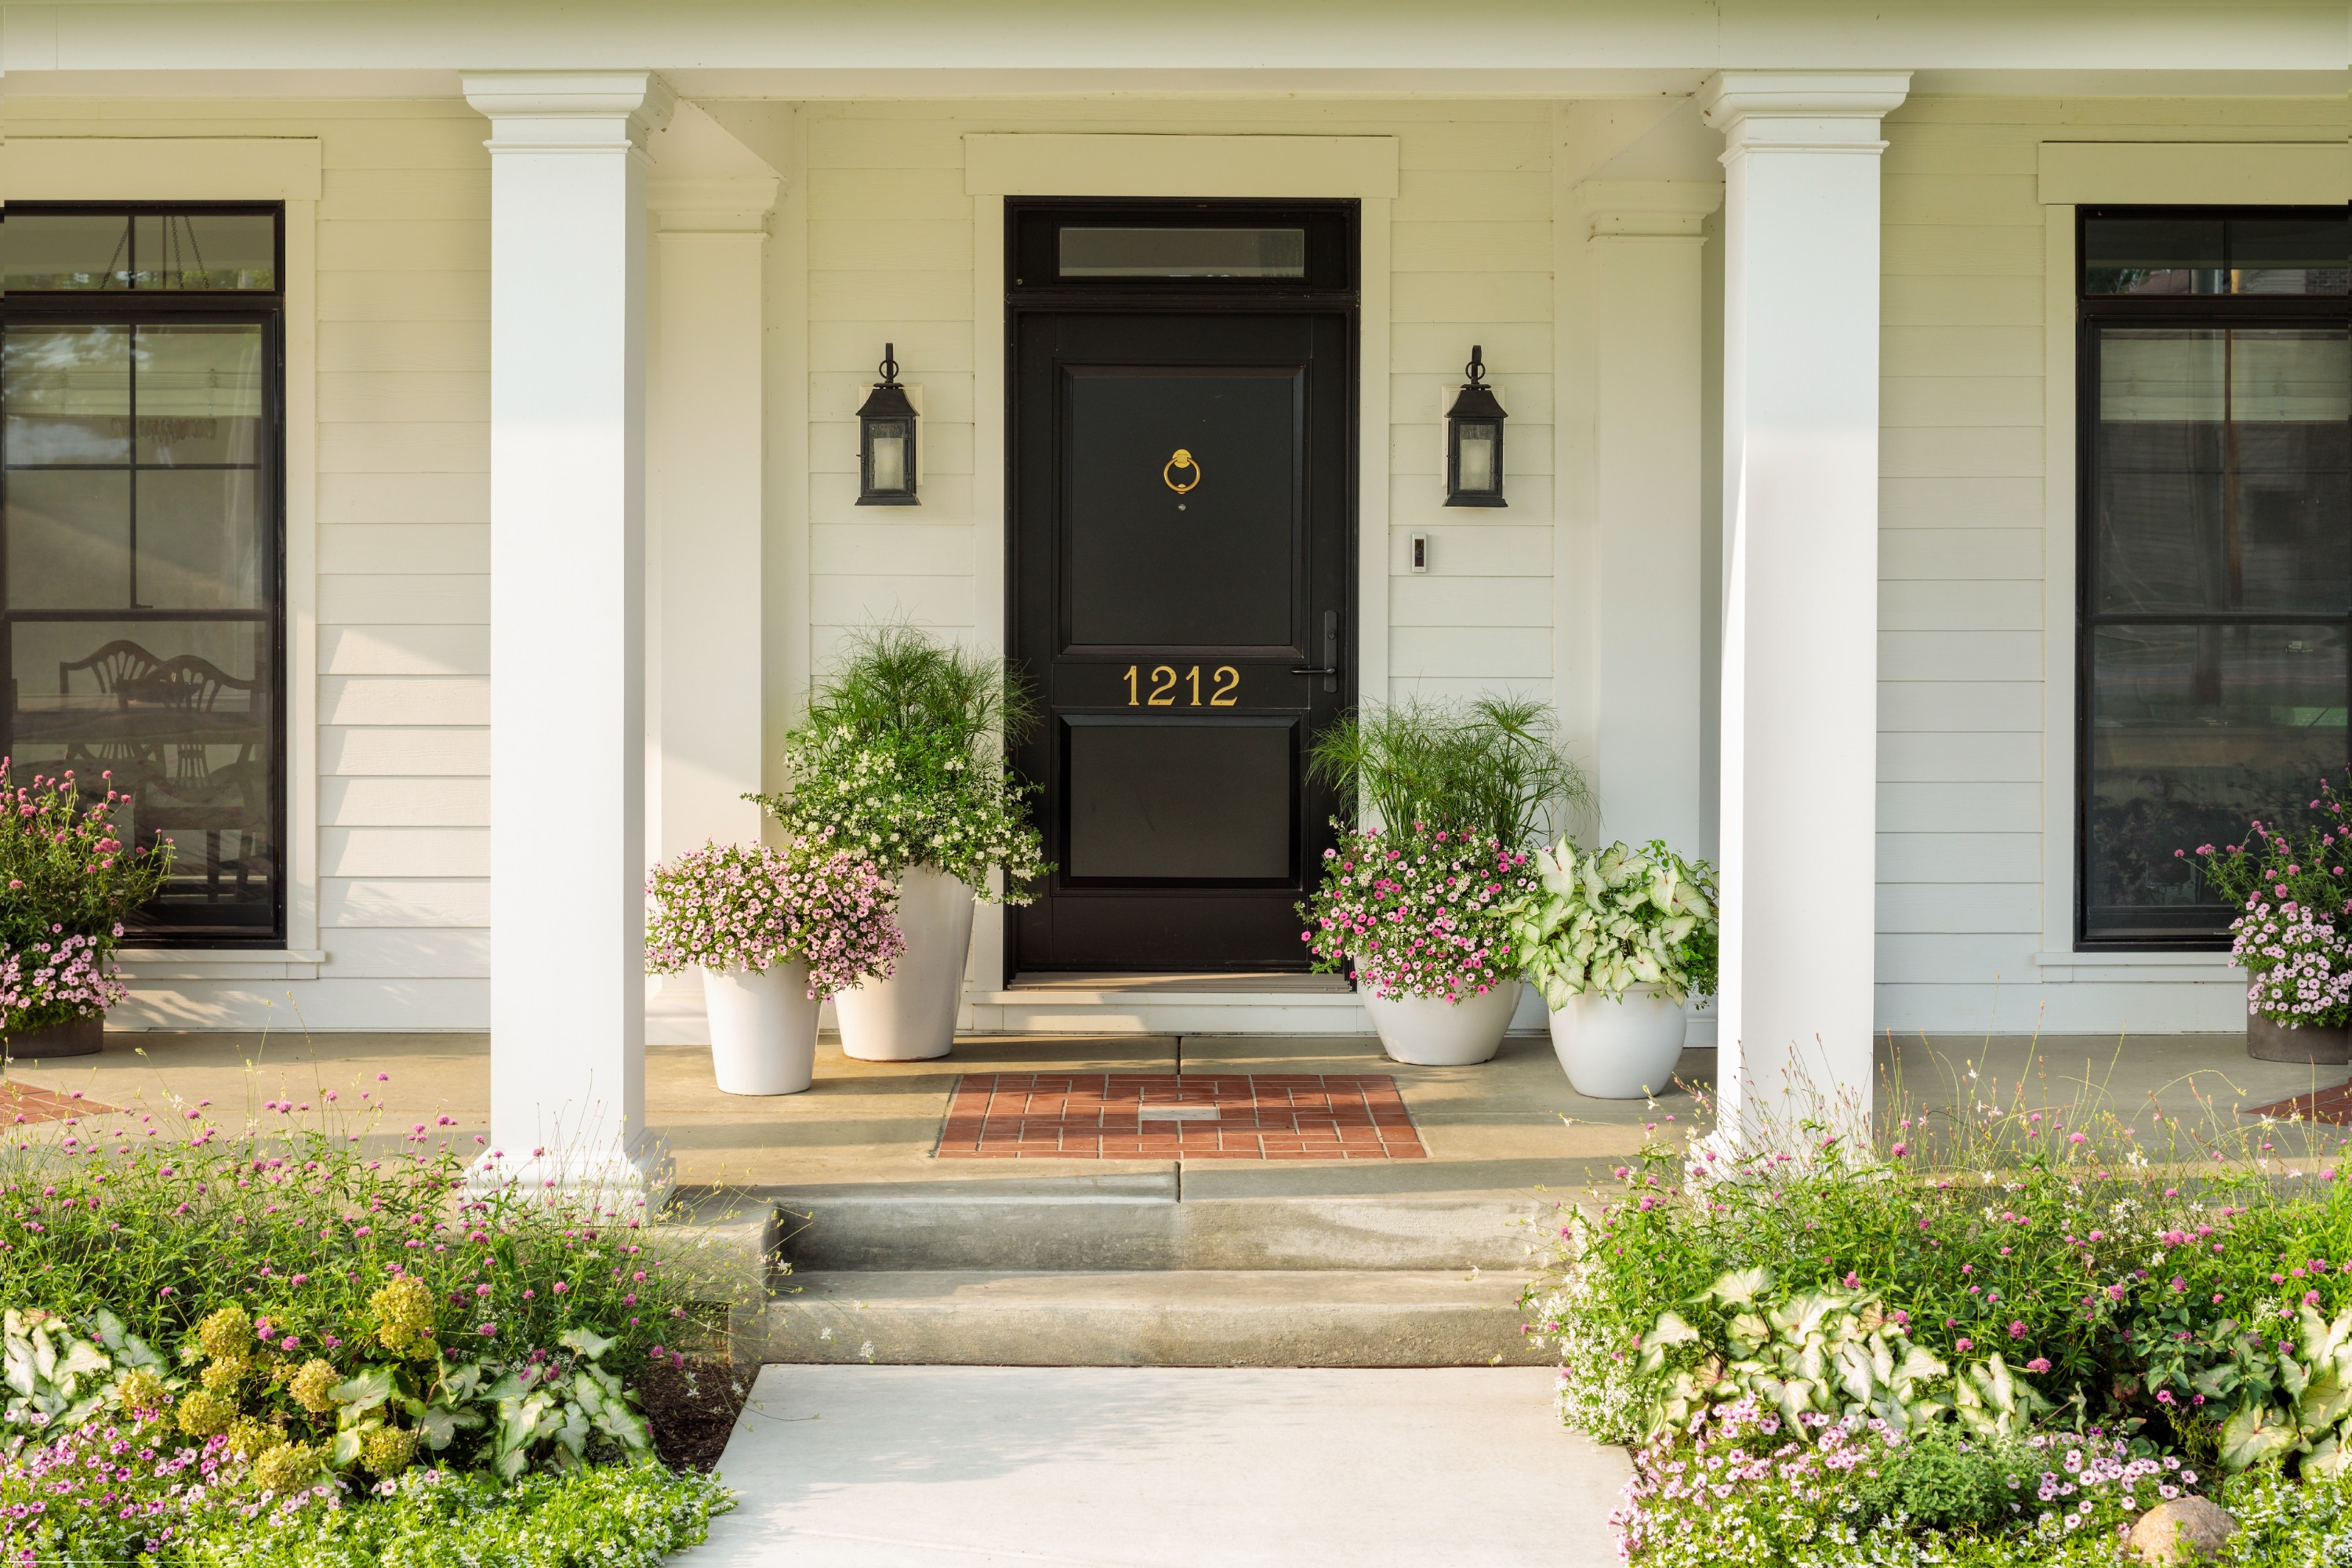 Summer Porch Decor: 12 Ways To Add Life To Your Home Exterior |